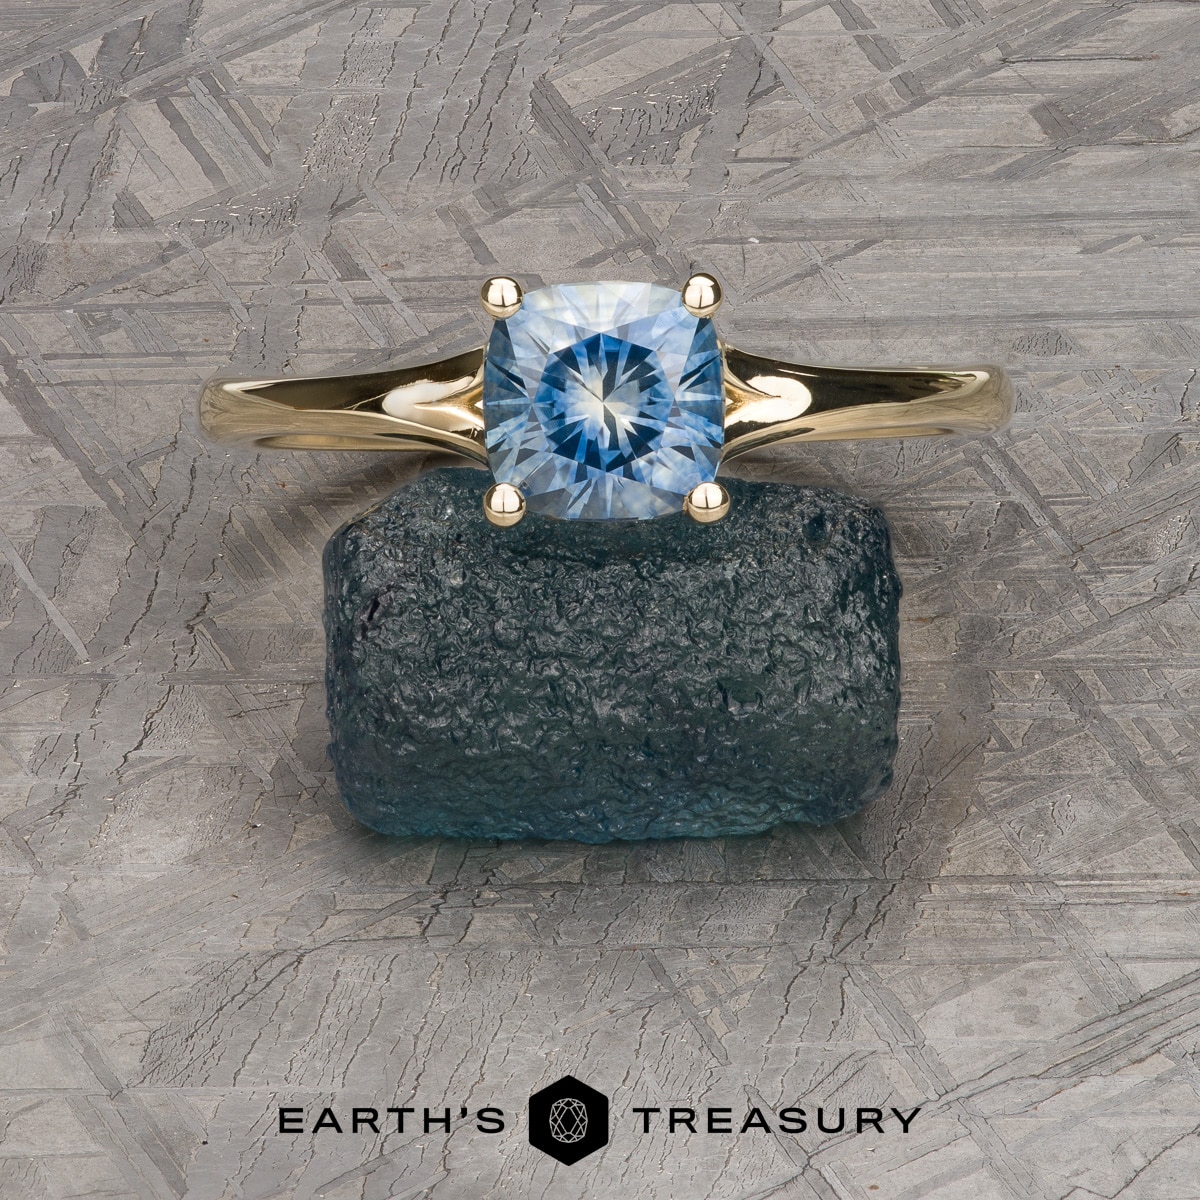 The "Daphne" in 14k yellow gold with 1.29-carat Montana sapphire